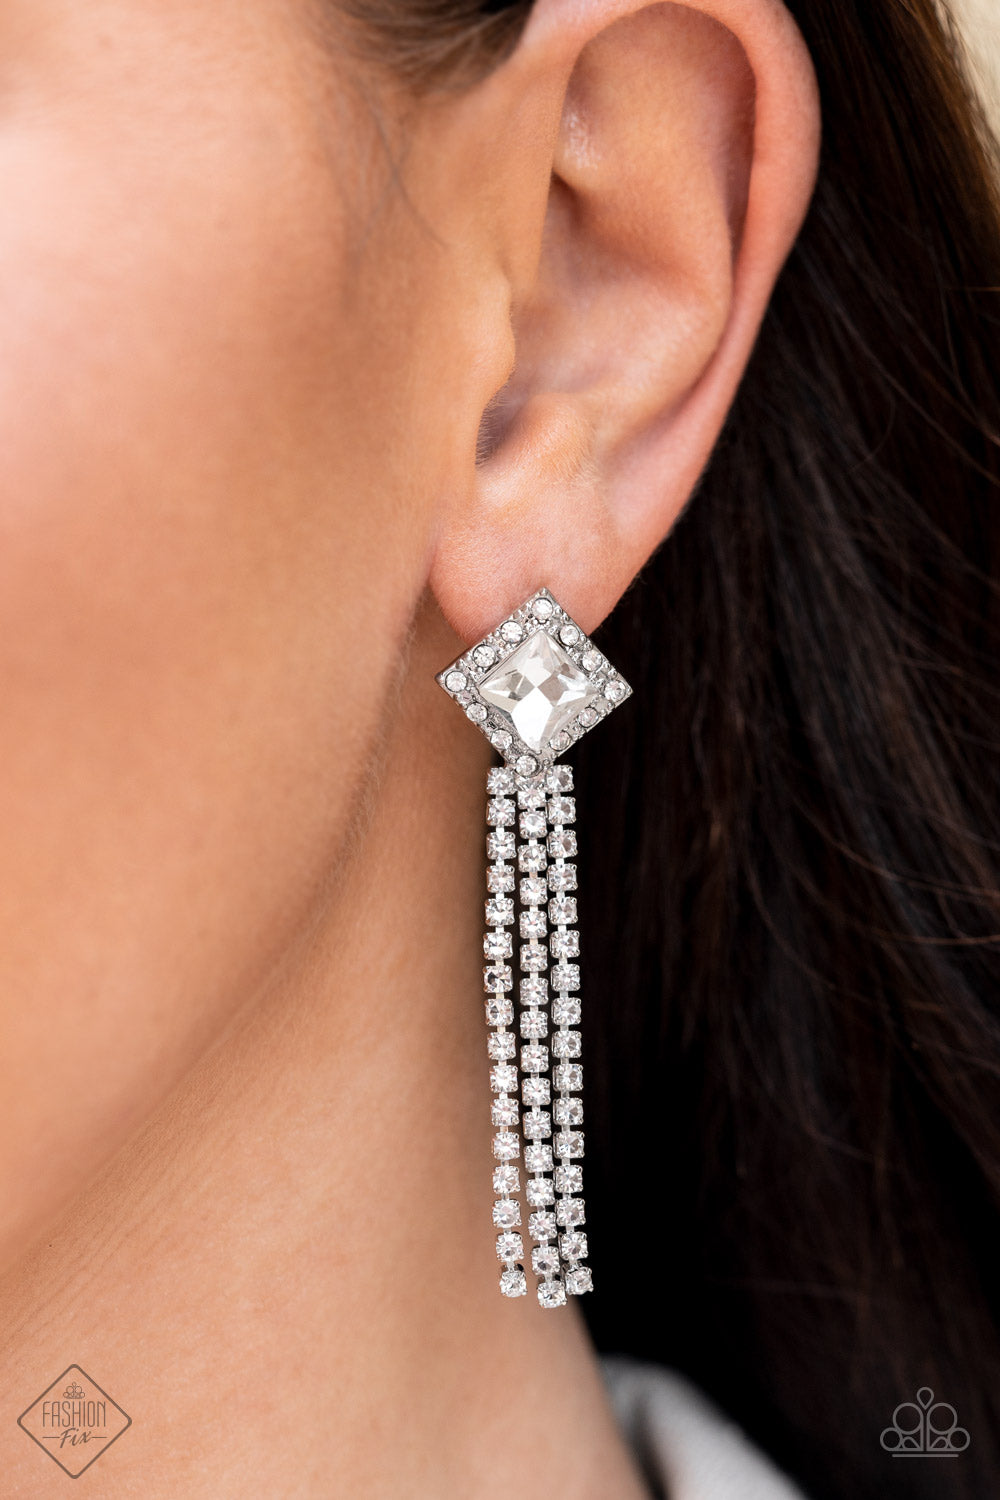 Seasonal Sparkle - White Rhinestone - Silver Earrings - Paparazzi Accessories - A brilliant, square-cut white rhinestone is bordered by tiny sparkling accents and tilted on a point, creating a dramatic anchoring point from which streams of glittery, square-cut rhinestones cascade from the ear in a glitzy finish. Earring attaches to a standard post fitting. Sold as one pair of post earrings.